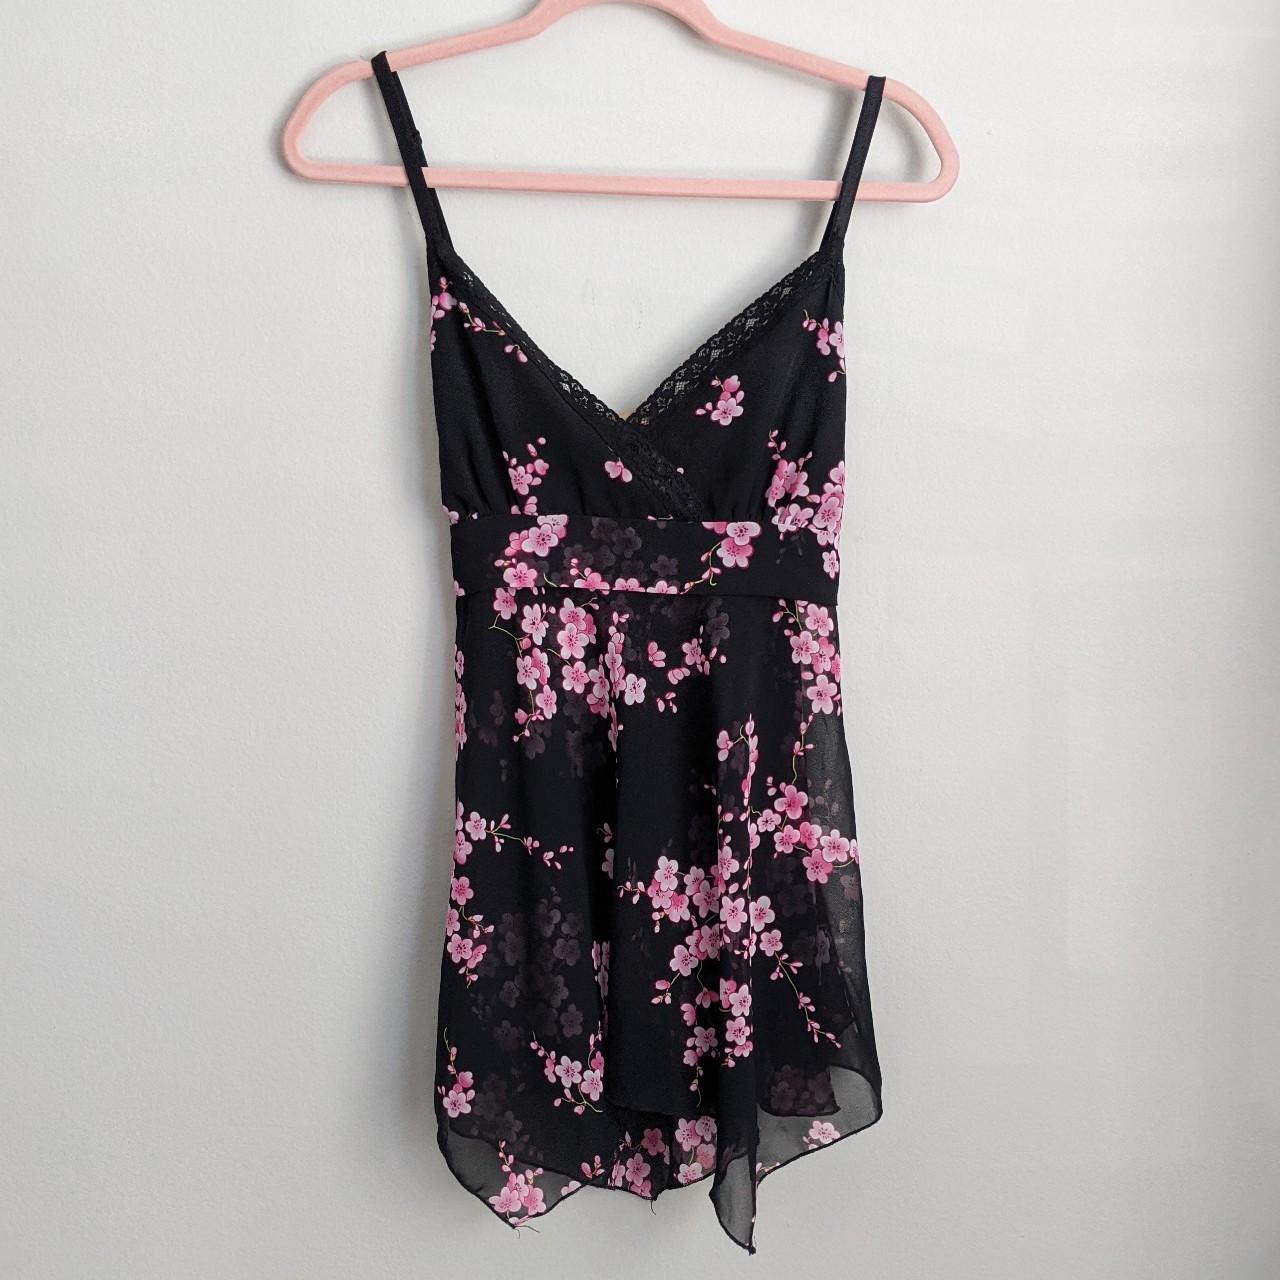 Product Image 2 - Sheer Floral Cami Top

Condition: Excellent